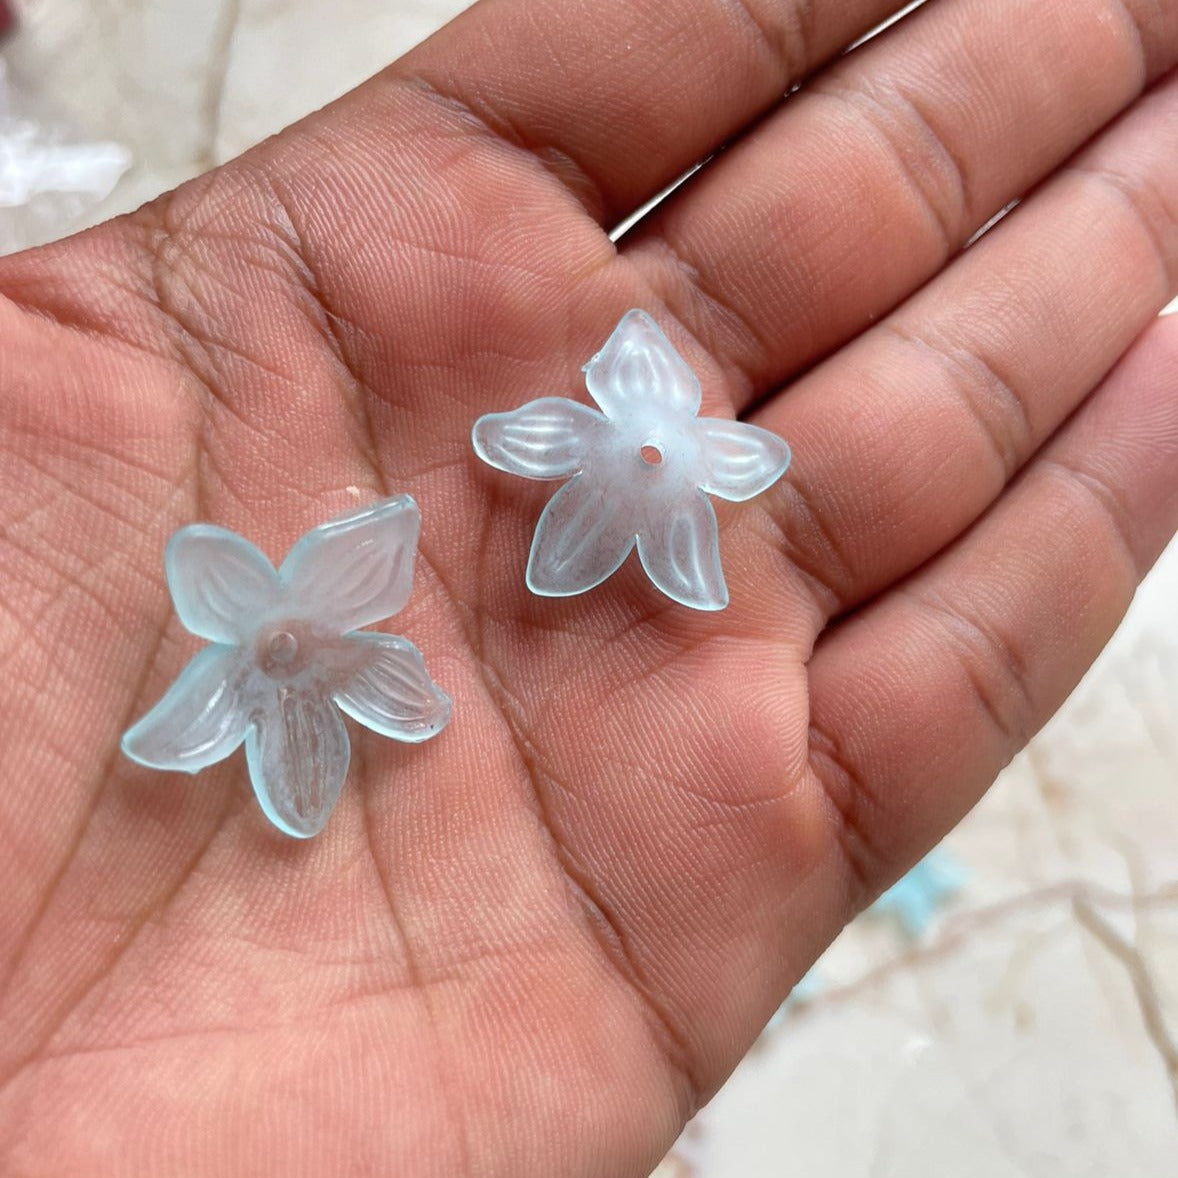 Artificial Acrylic Flowers